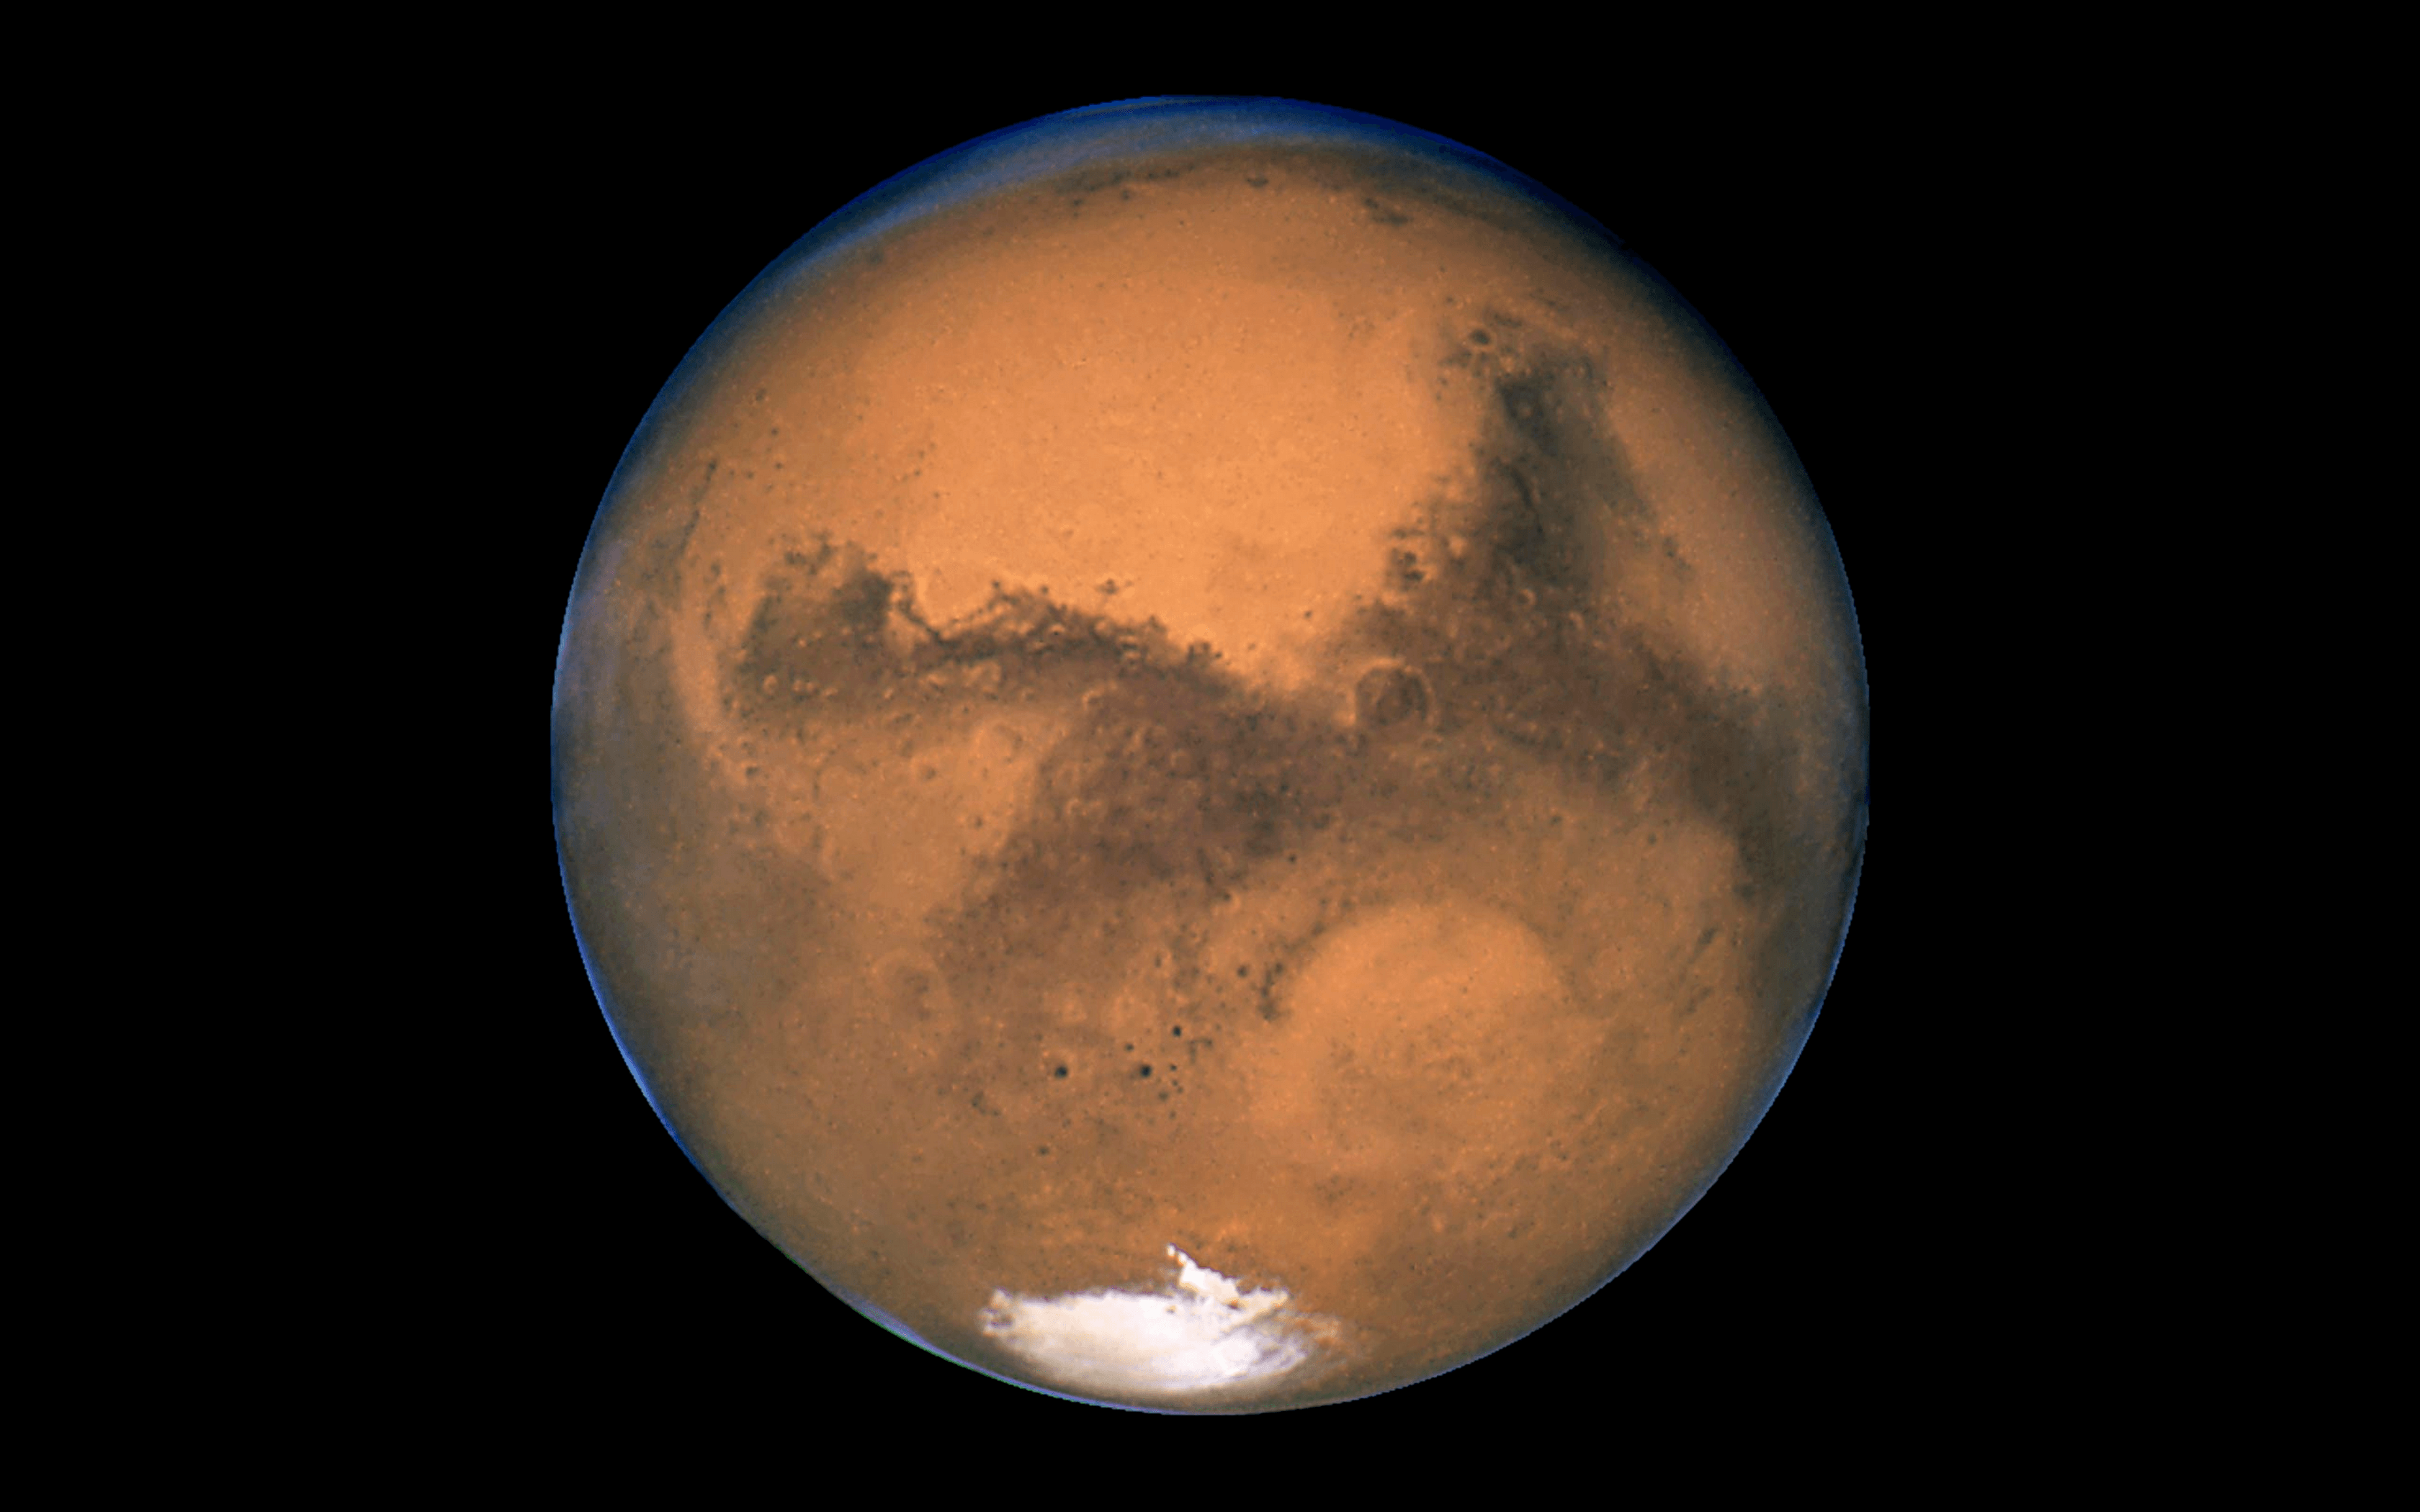 MARTIANS: 3 Facts About Mars That Might Surprise You